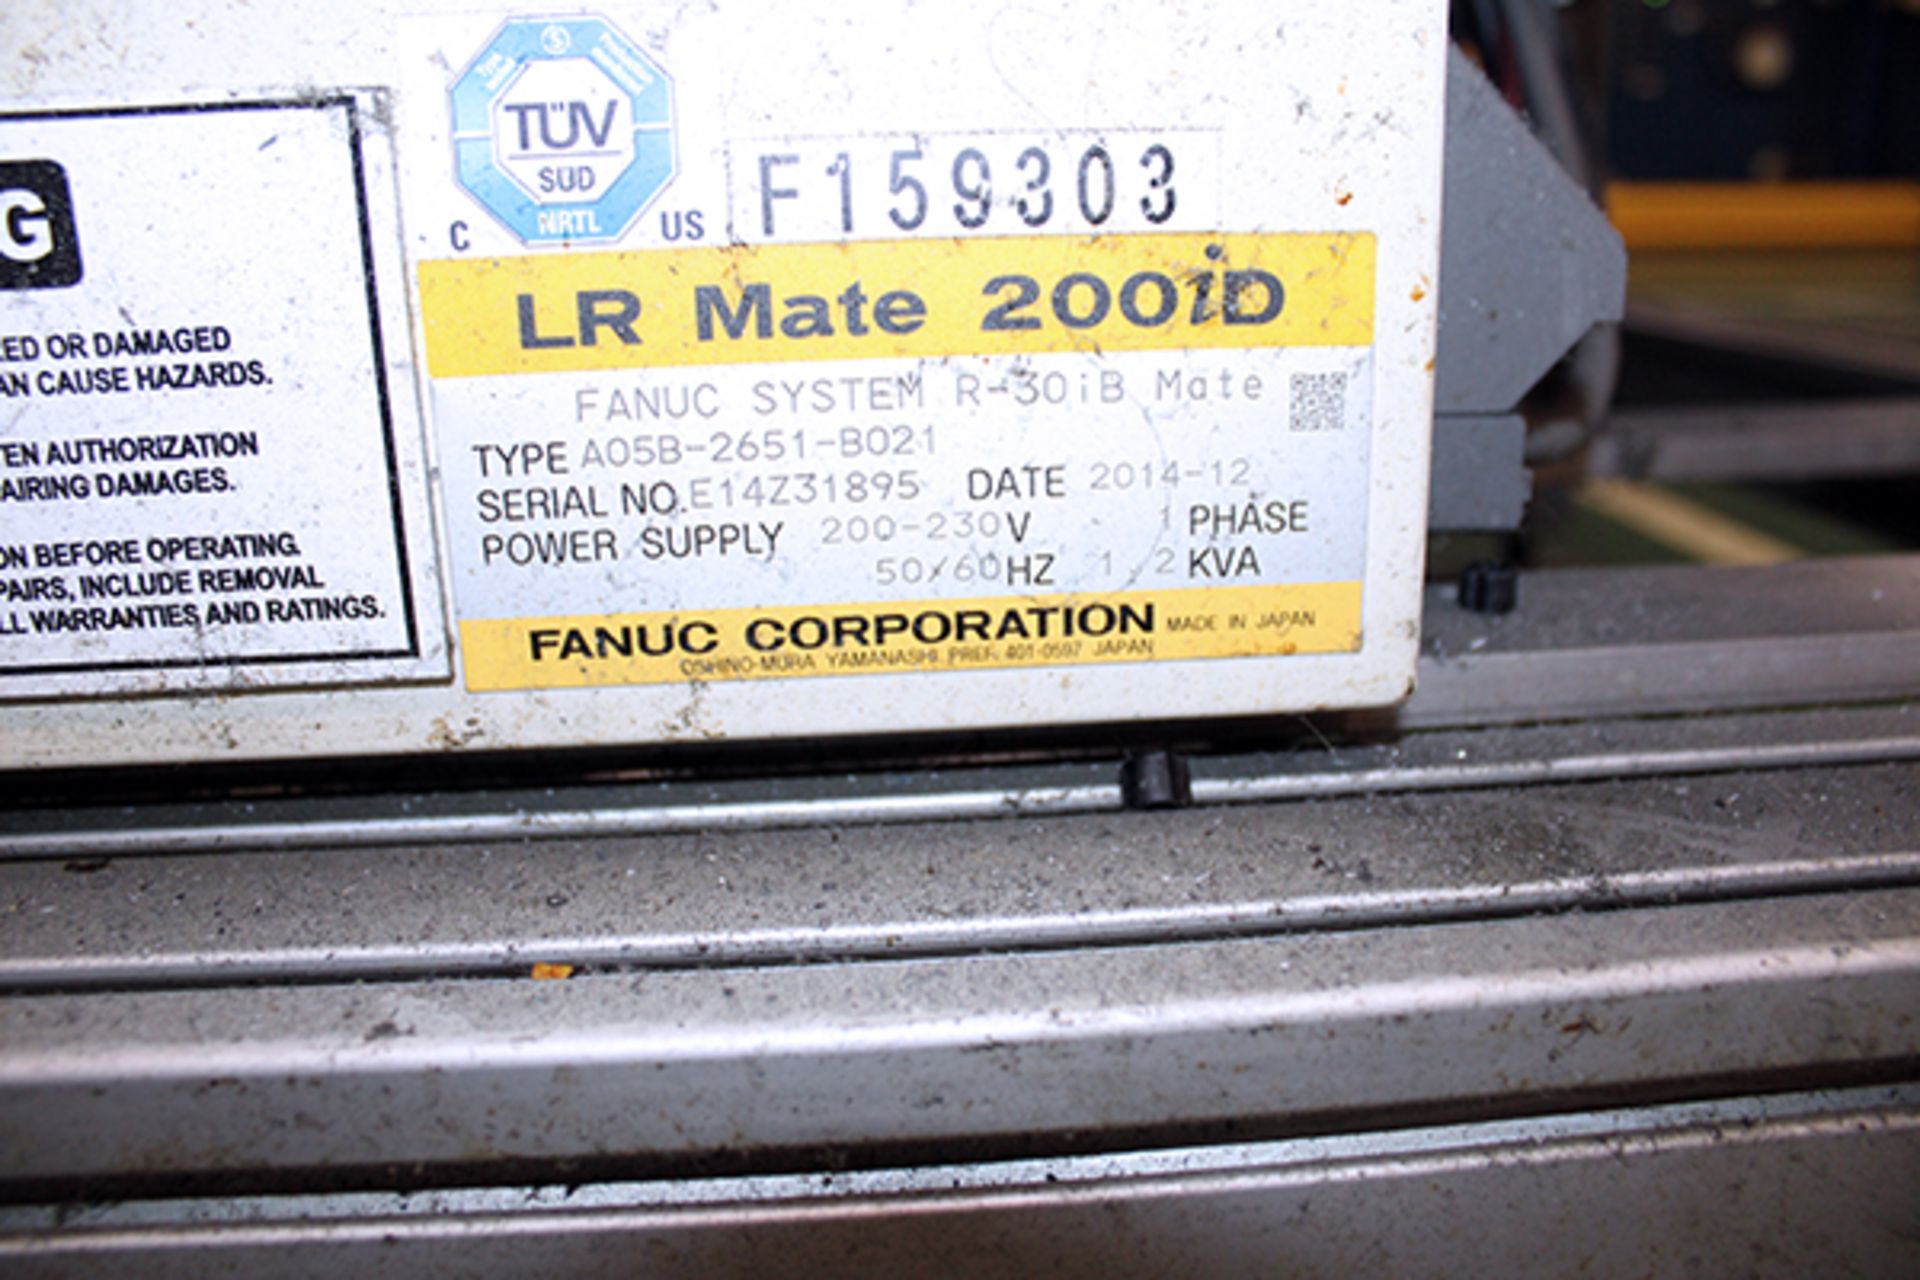 Fanuc LR Mate 200iD 7L Robot Bolt Assembly Cells (2 of 2) - Image 9 of 10